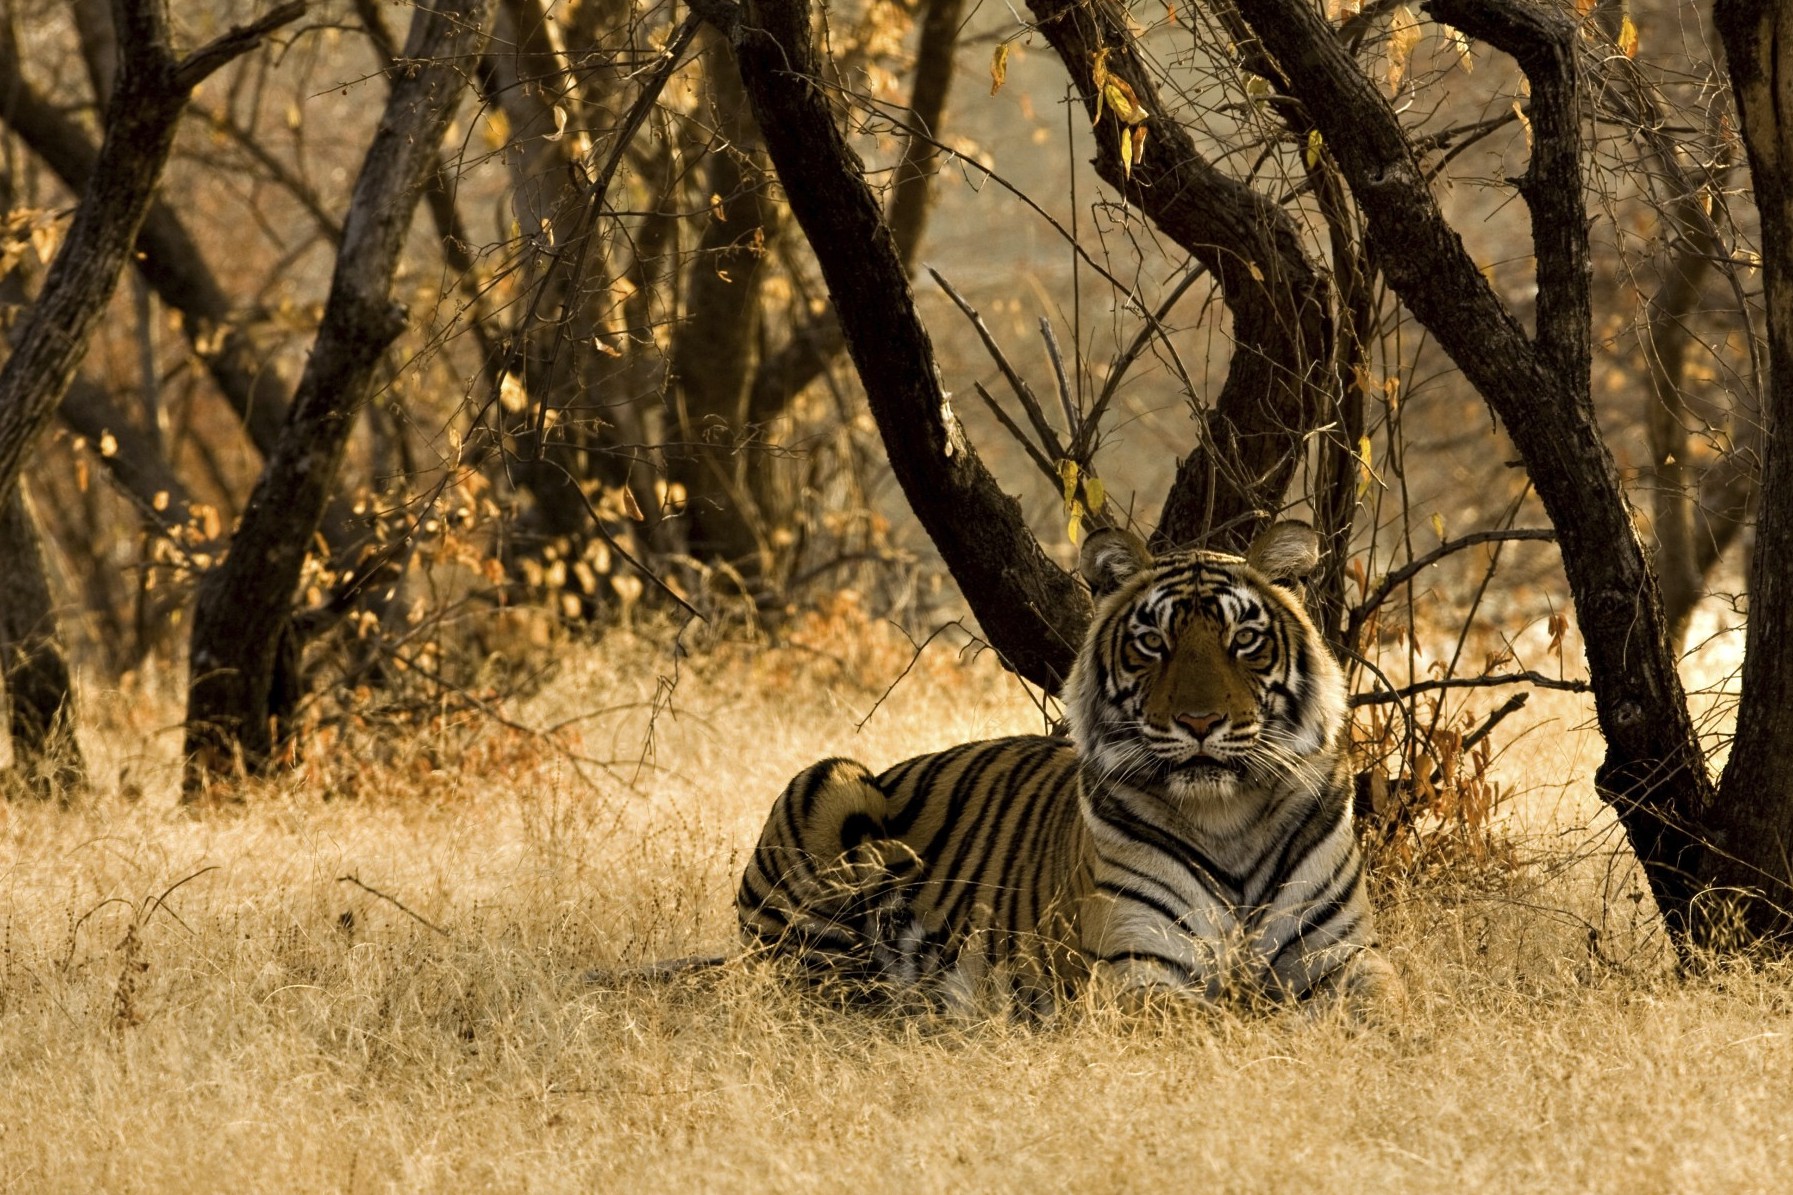 A wild tiger sitting on the dry grasses in a reserve in India.